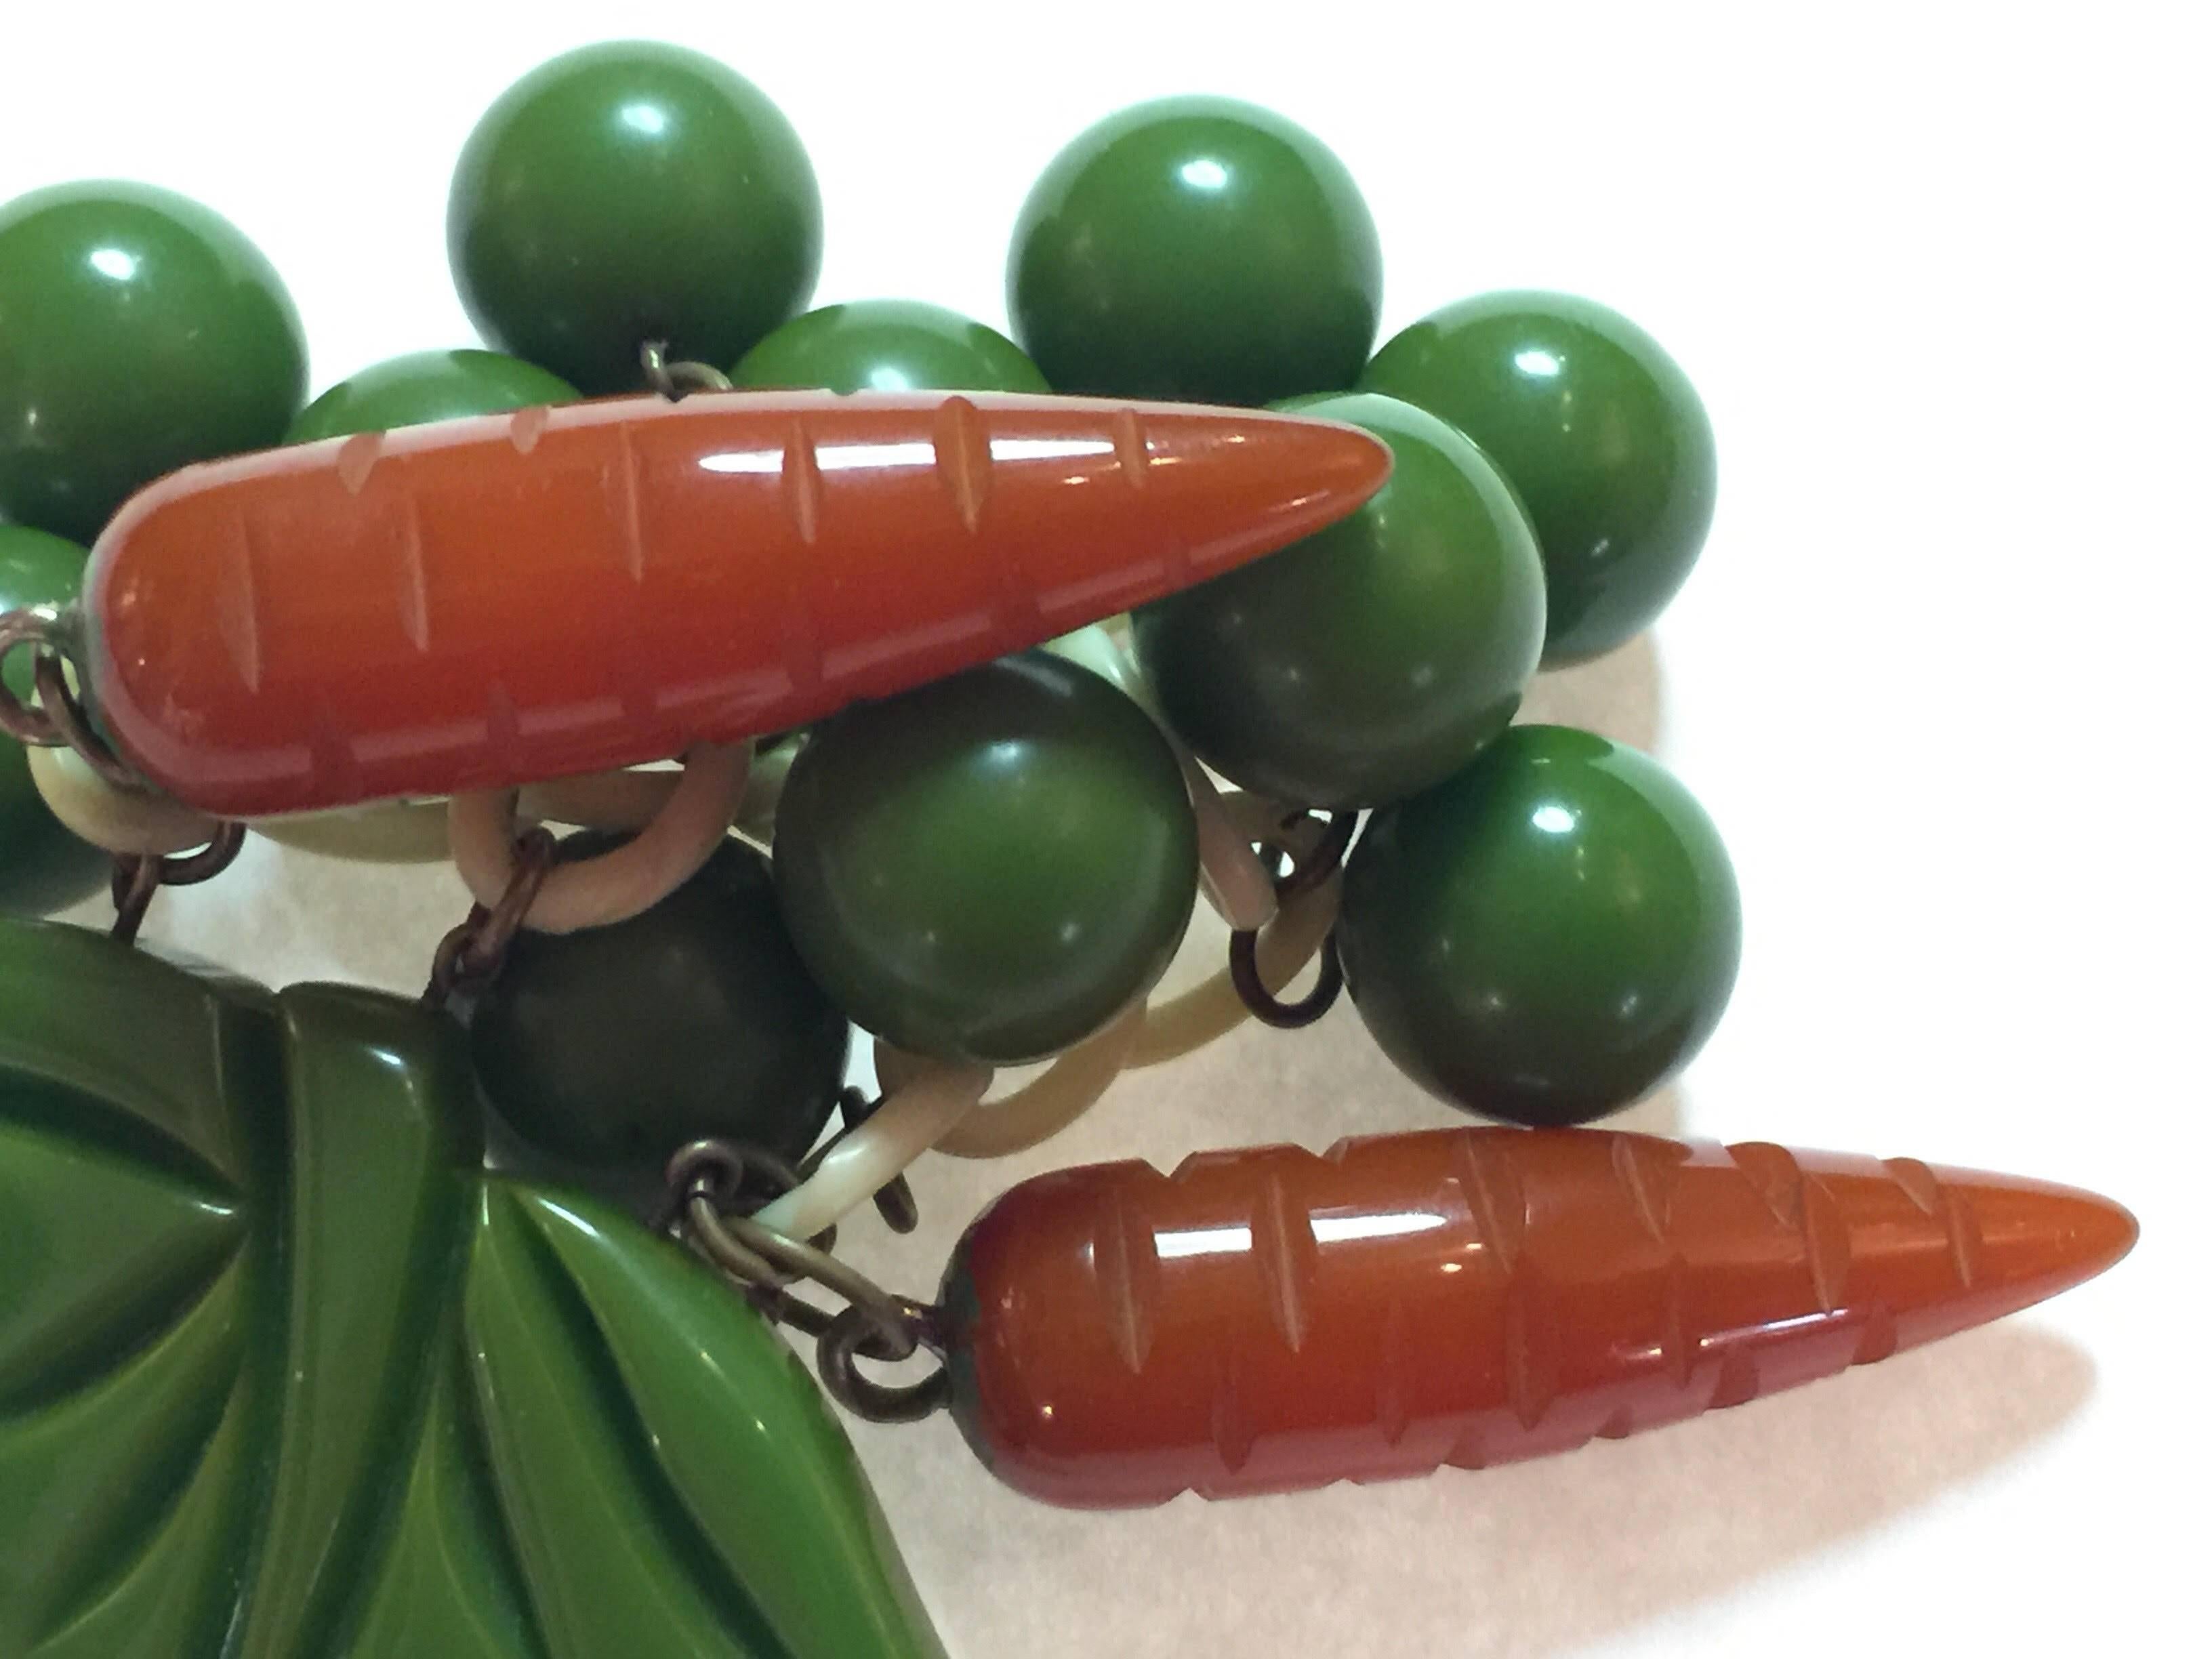 Women's 1930s Whimsical Bakelite Peas and Carrots Figural Brooch/Pin For Sale